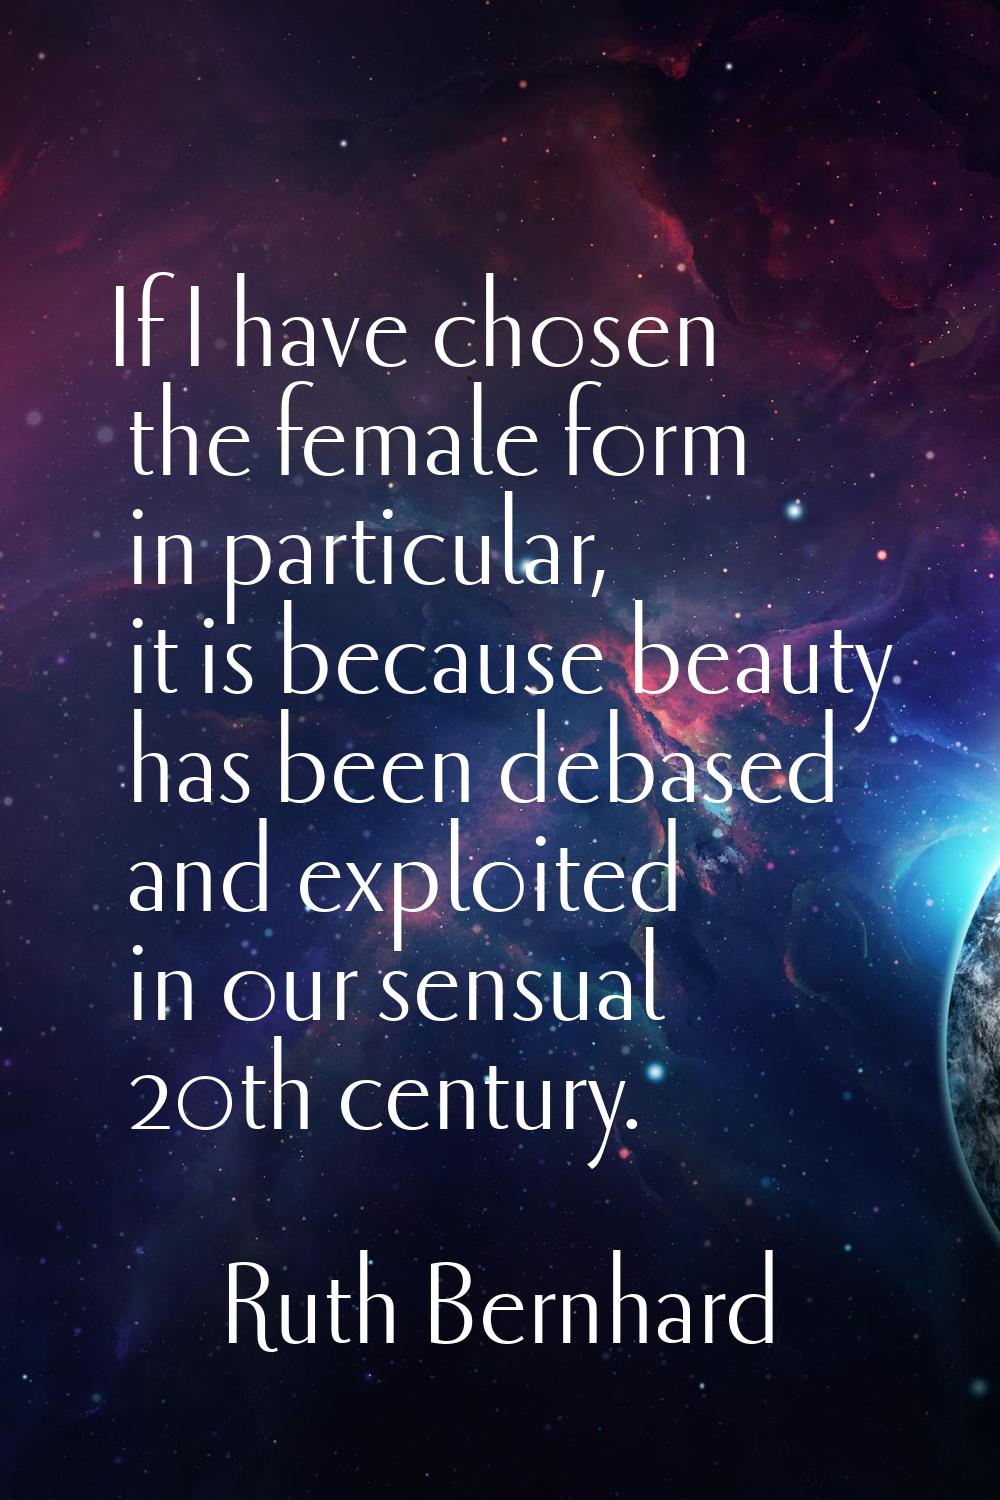 If I have chosen the female form in particular, it is because beauty has been debased and exploited